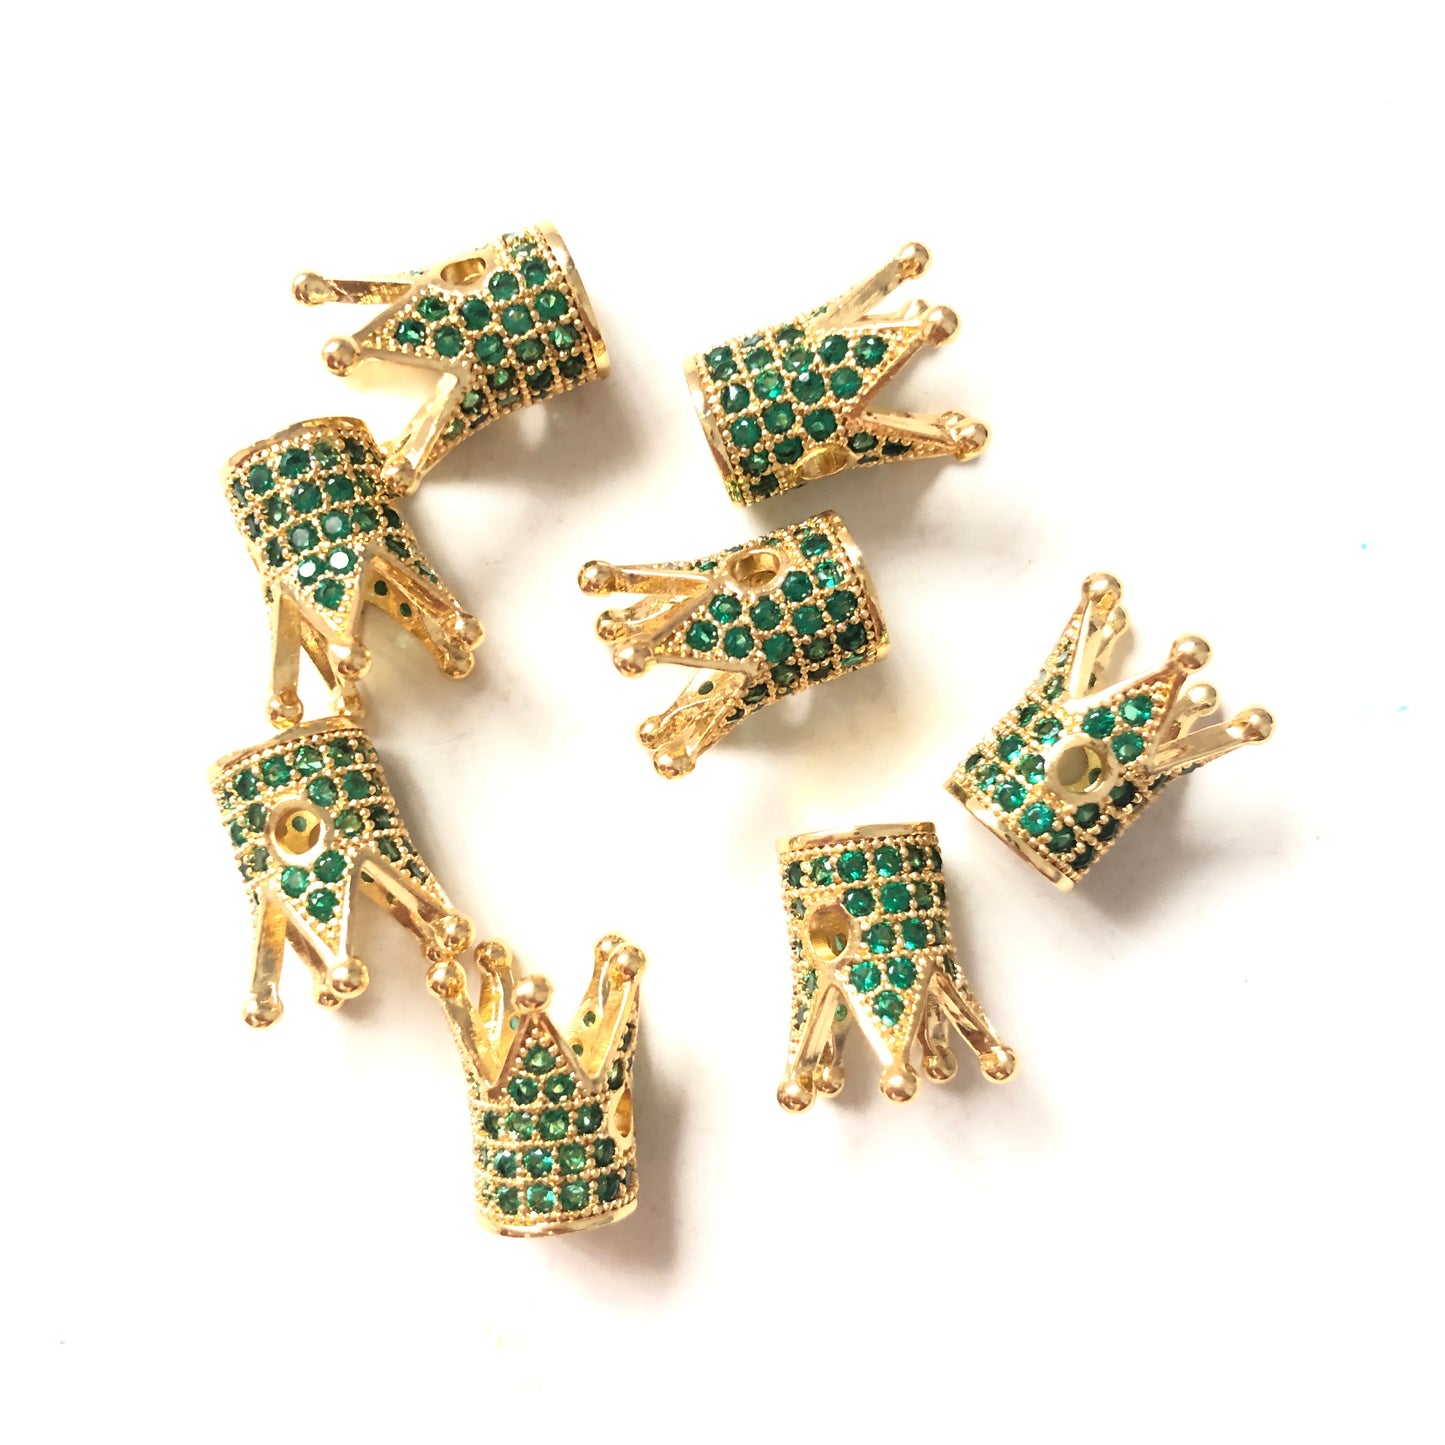 10pcs/lot Green CZ Paved Crown Spacers Gold CZ Paved Spacers Colorful Zirconia Crown Beads Charms Beads Beyond